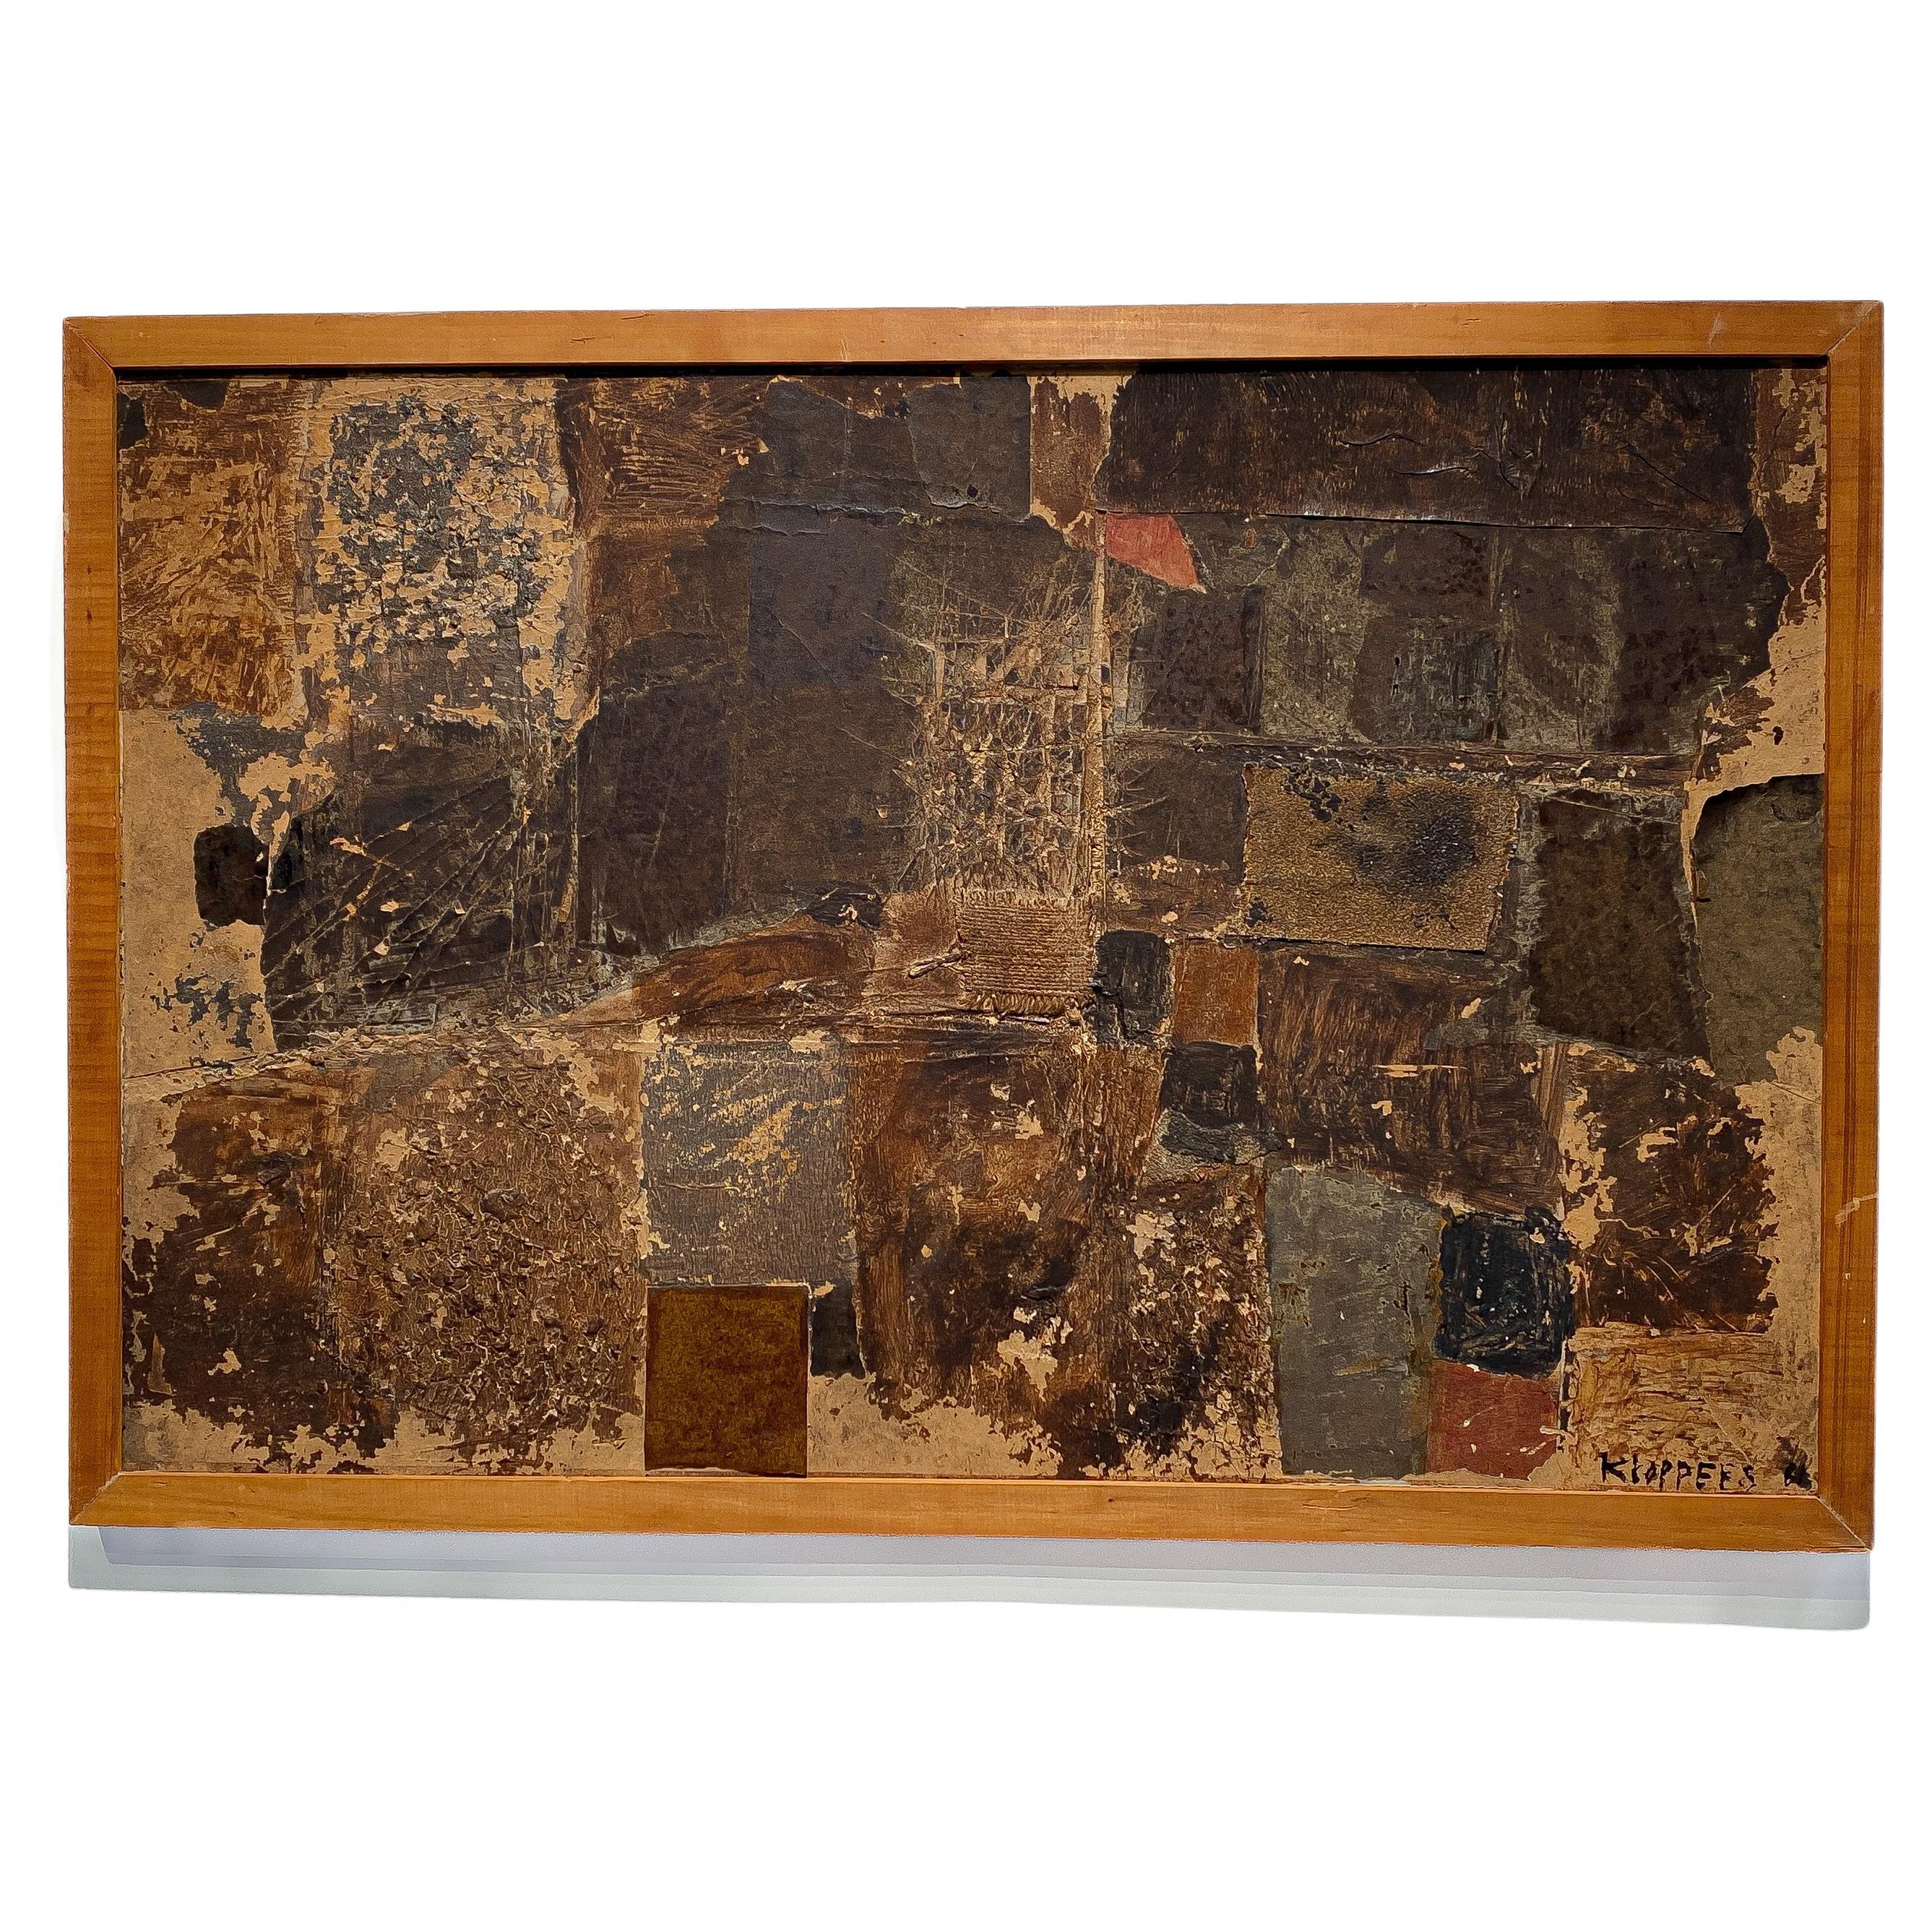 Willem Kloppers, abstract/brutalist "Matter Painting", ca. 1970 in tonal brown